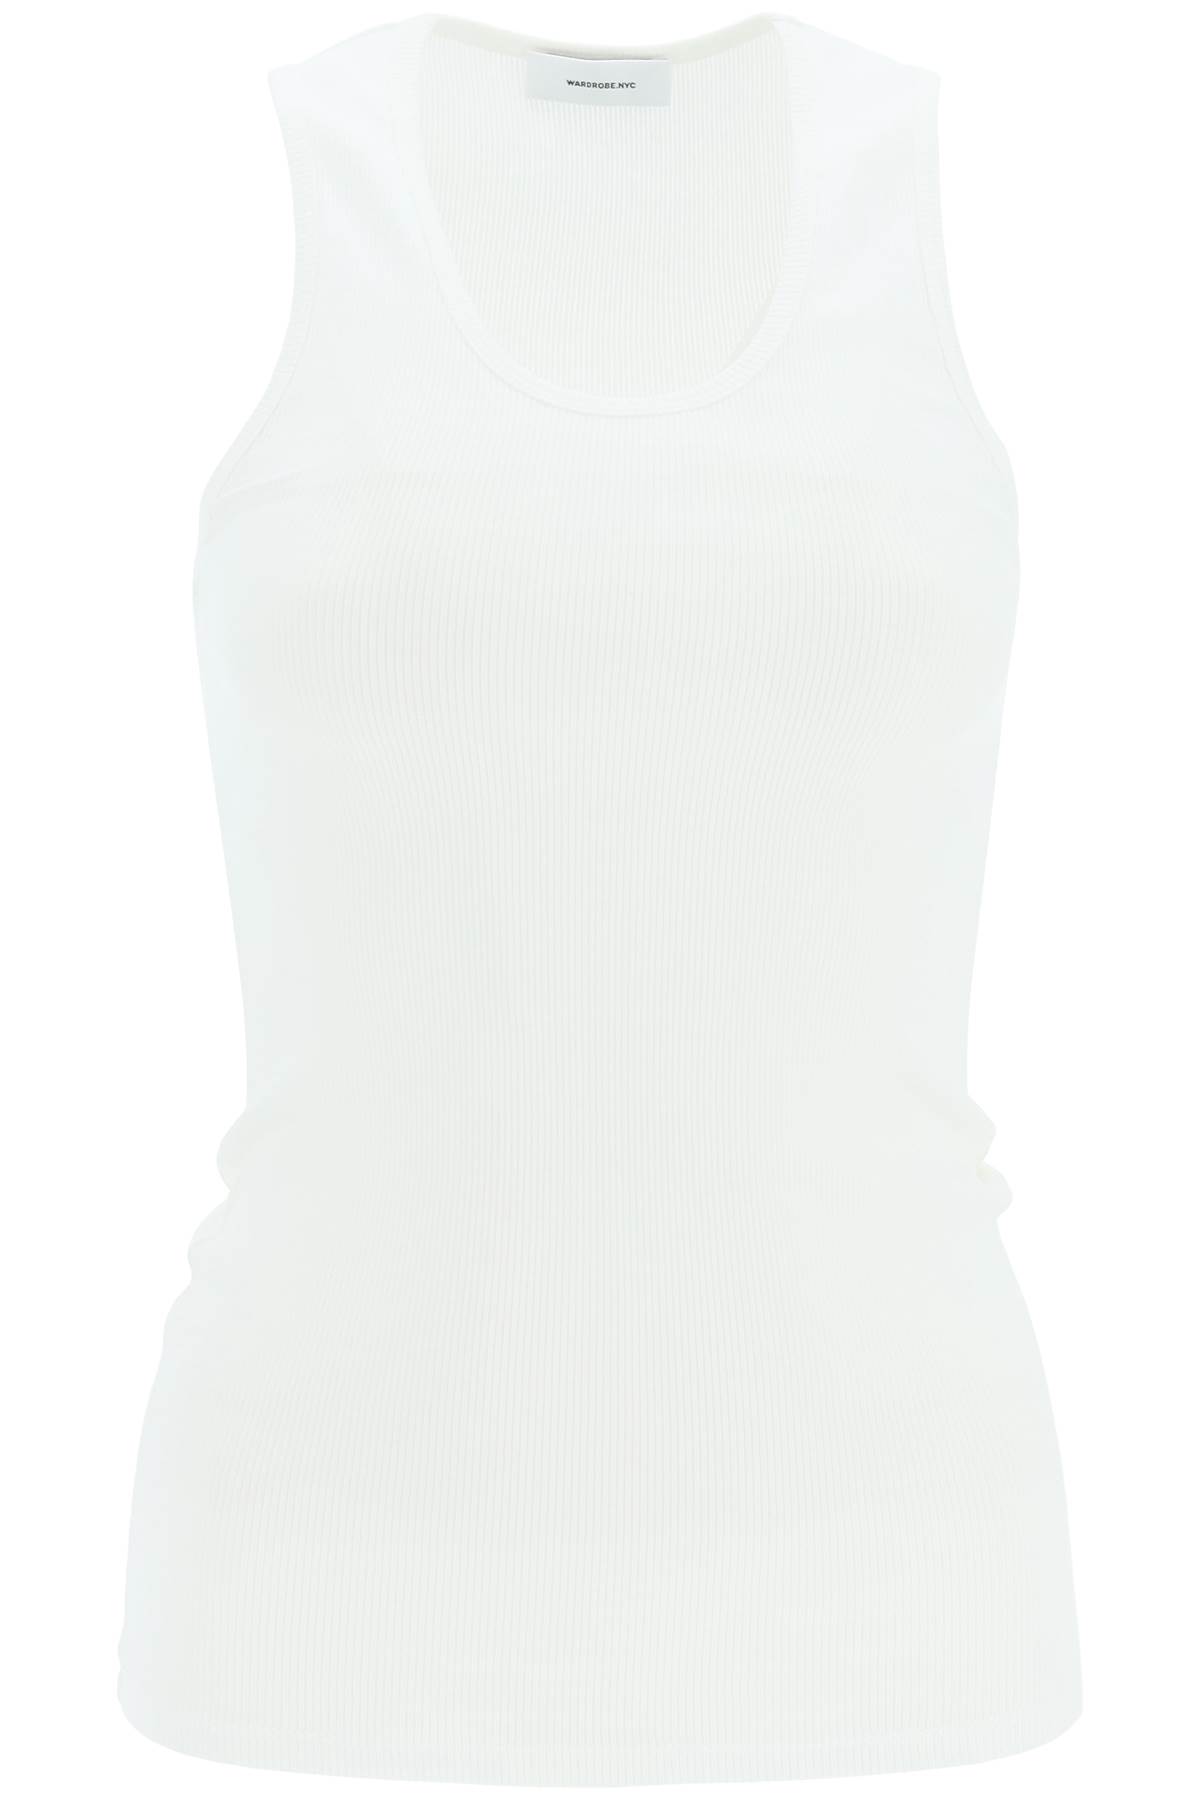 Shop Wardrobe.nyc Ribbed Cotton Tank Top In Wht White